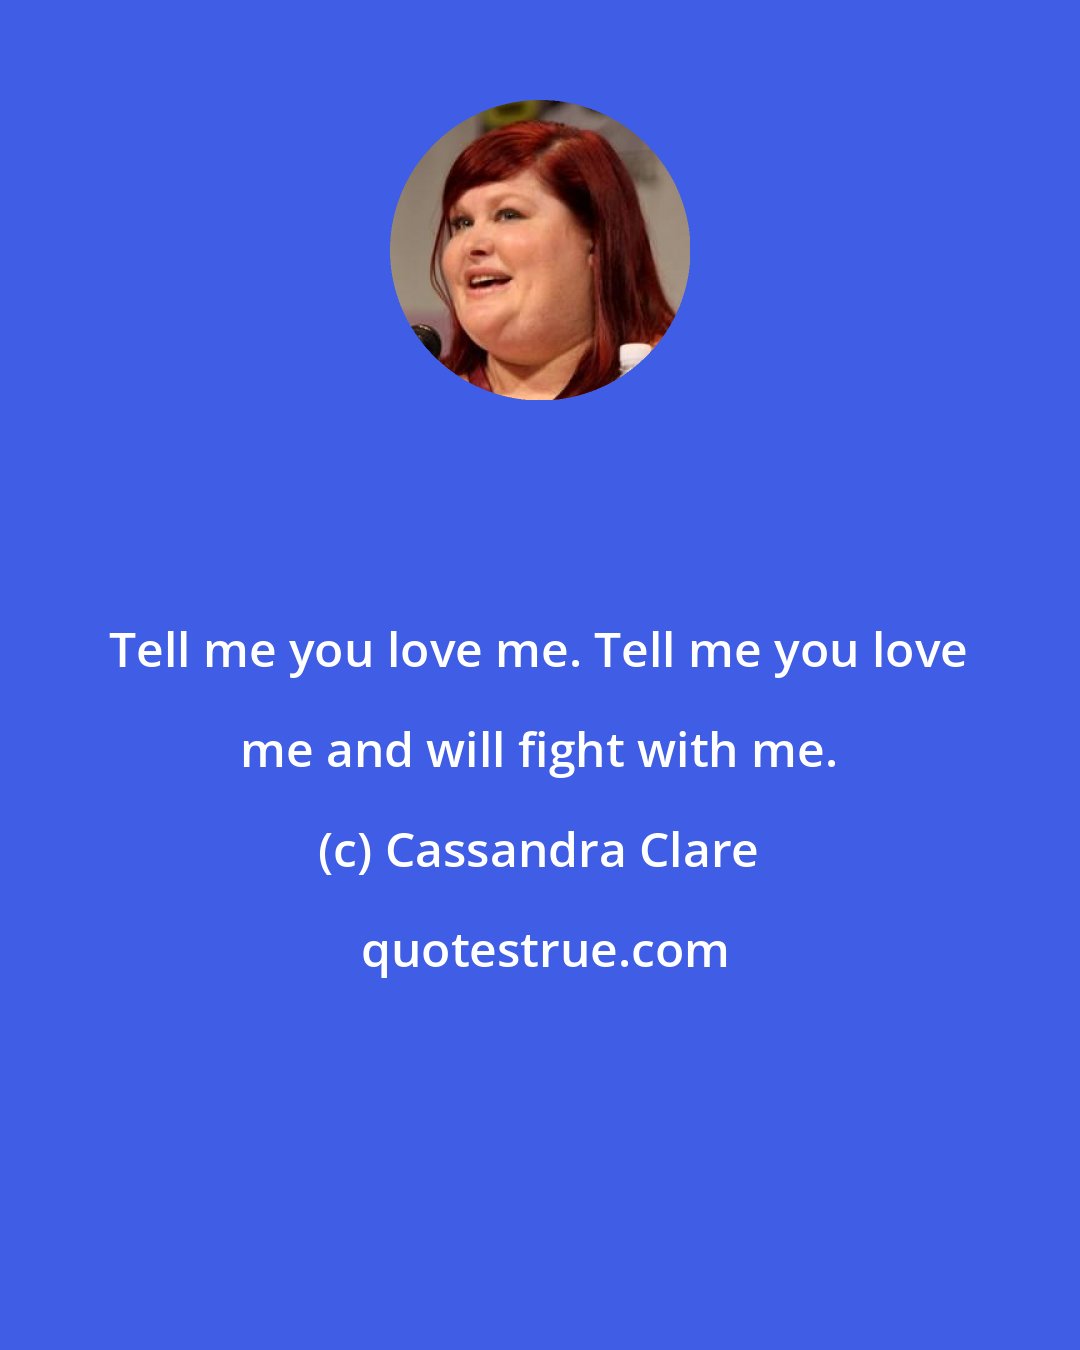 Cassandra Clare: Tell me you love me. Tell me you love me and will fight with me.